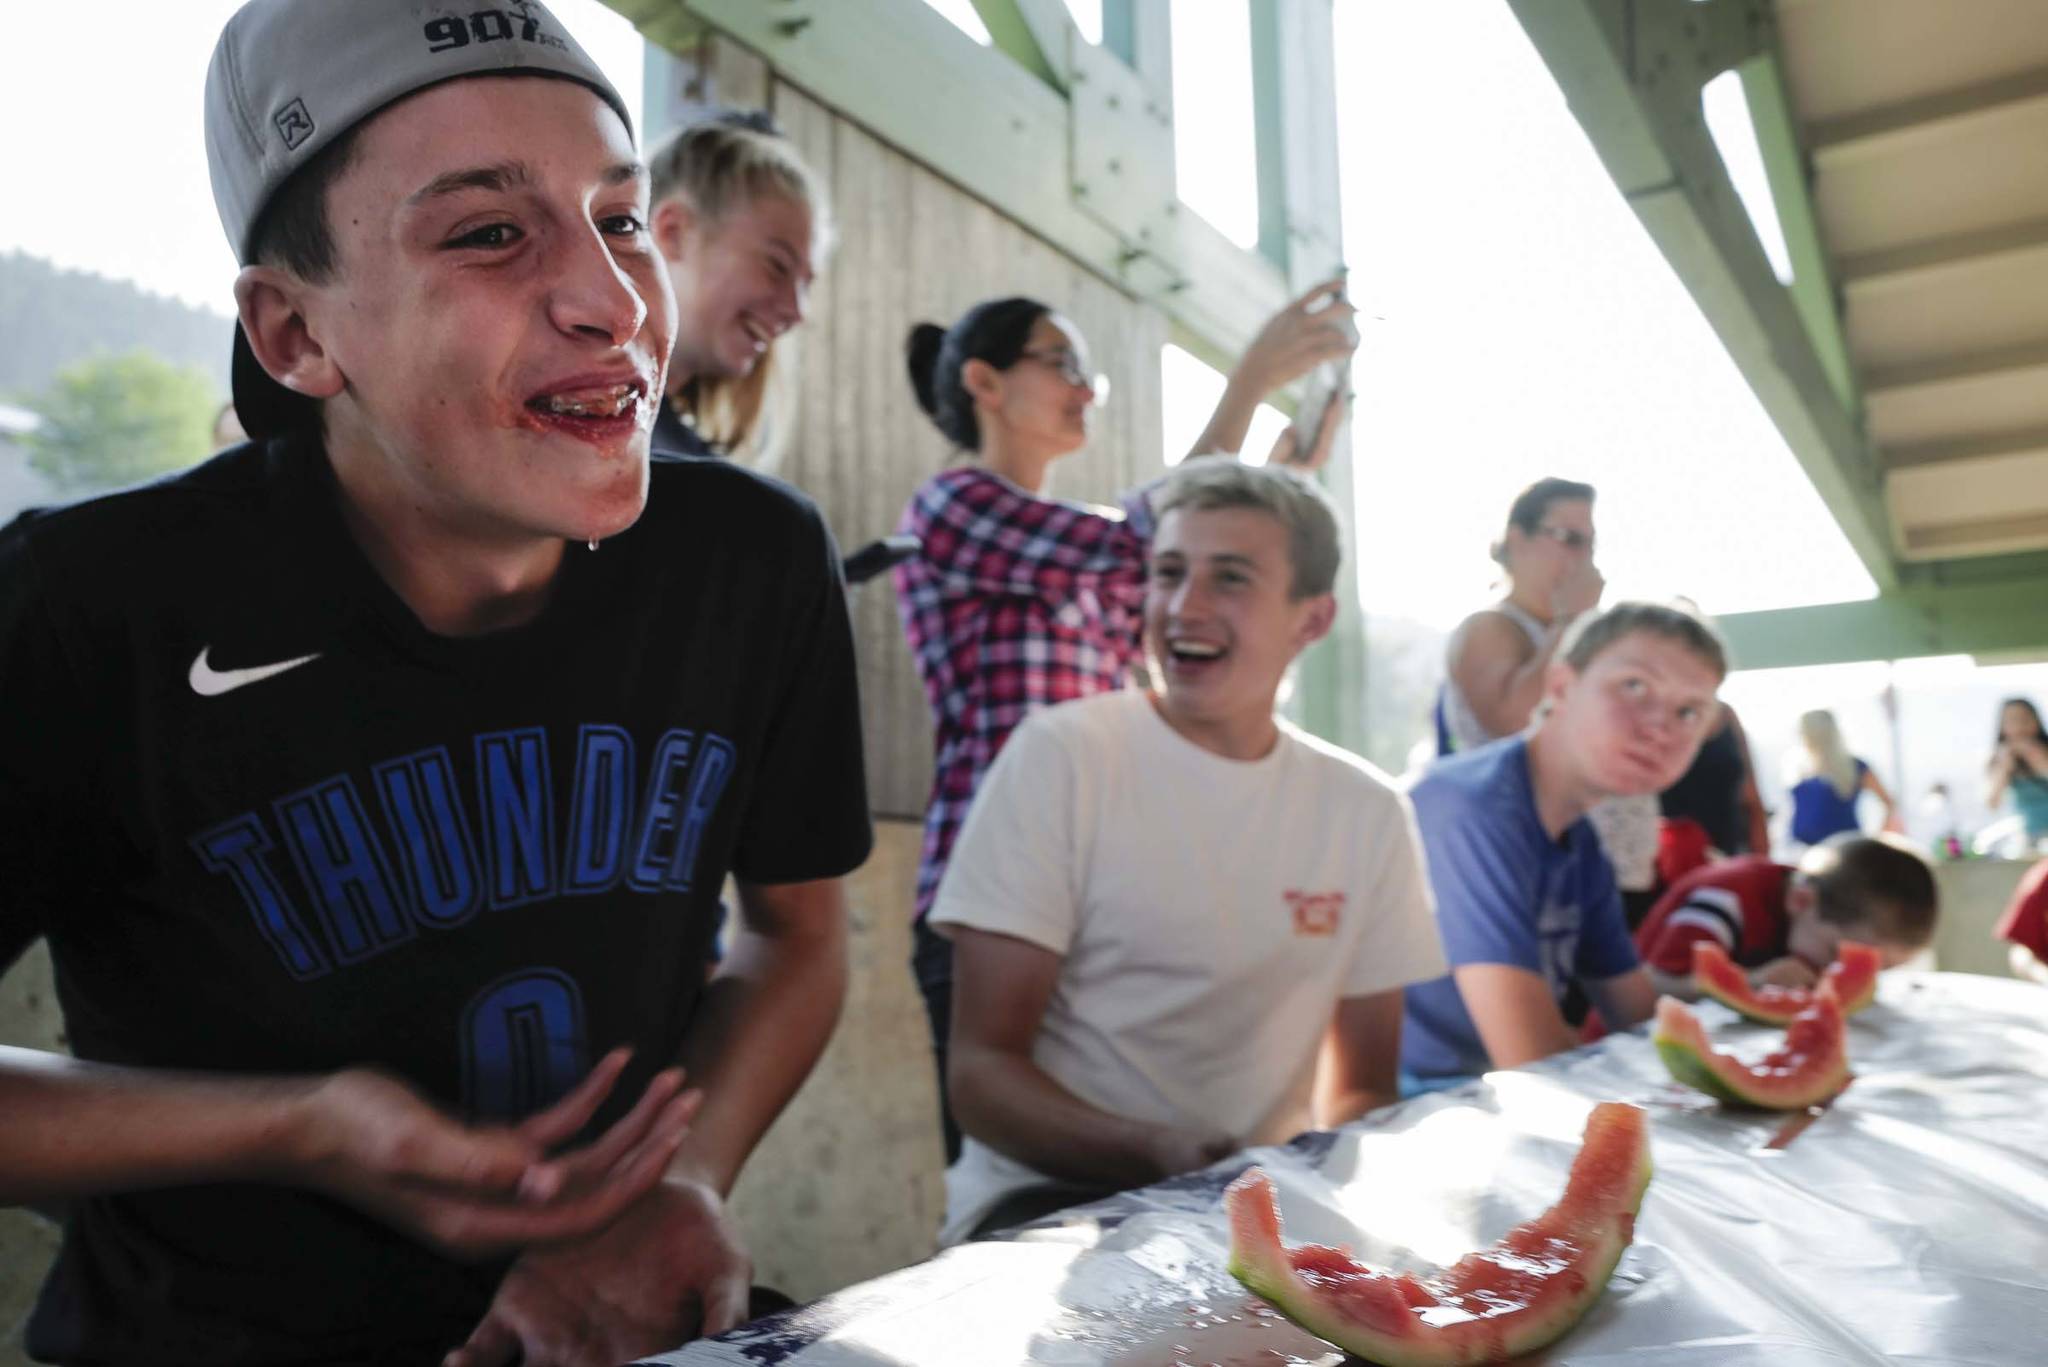 Kai Hargrave, 14, left, and his friend Chaz Van Slyke,14, laugh after participating in a watermelon eating contest during a community picnic sponsored by the Douglas Fourth of July Committee and Capital City Fire/Rescue at Sandy Beach on Wednesday, July 3, 2019. (Michael Penn | Juneau Empire)